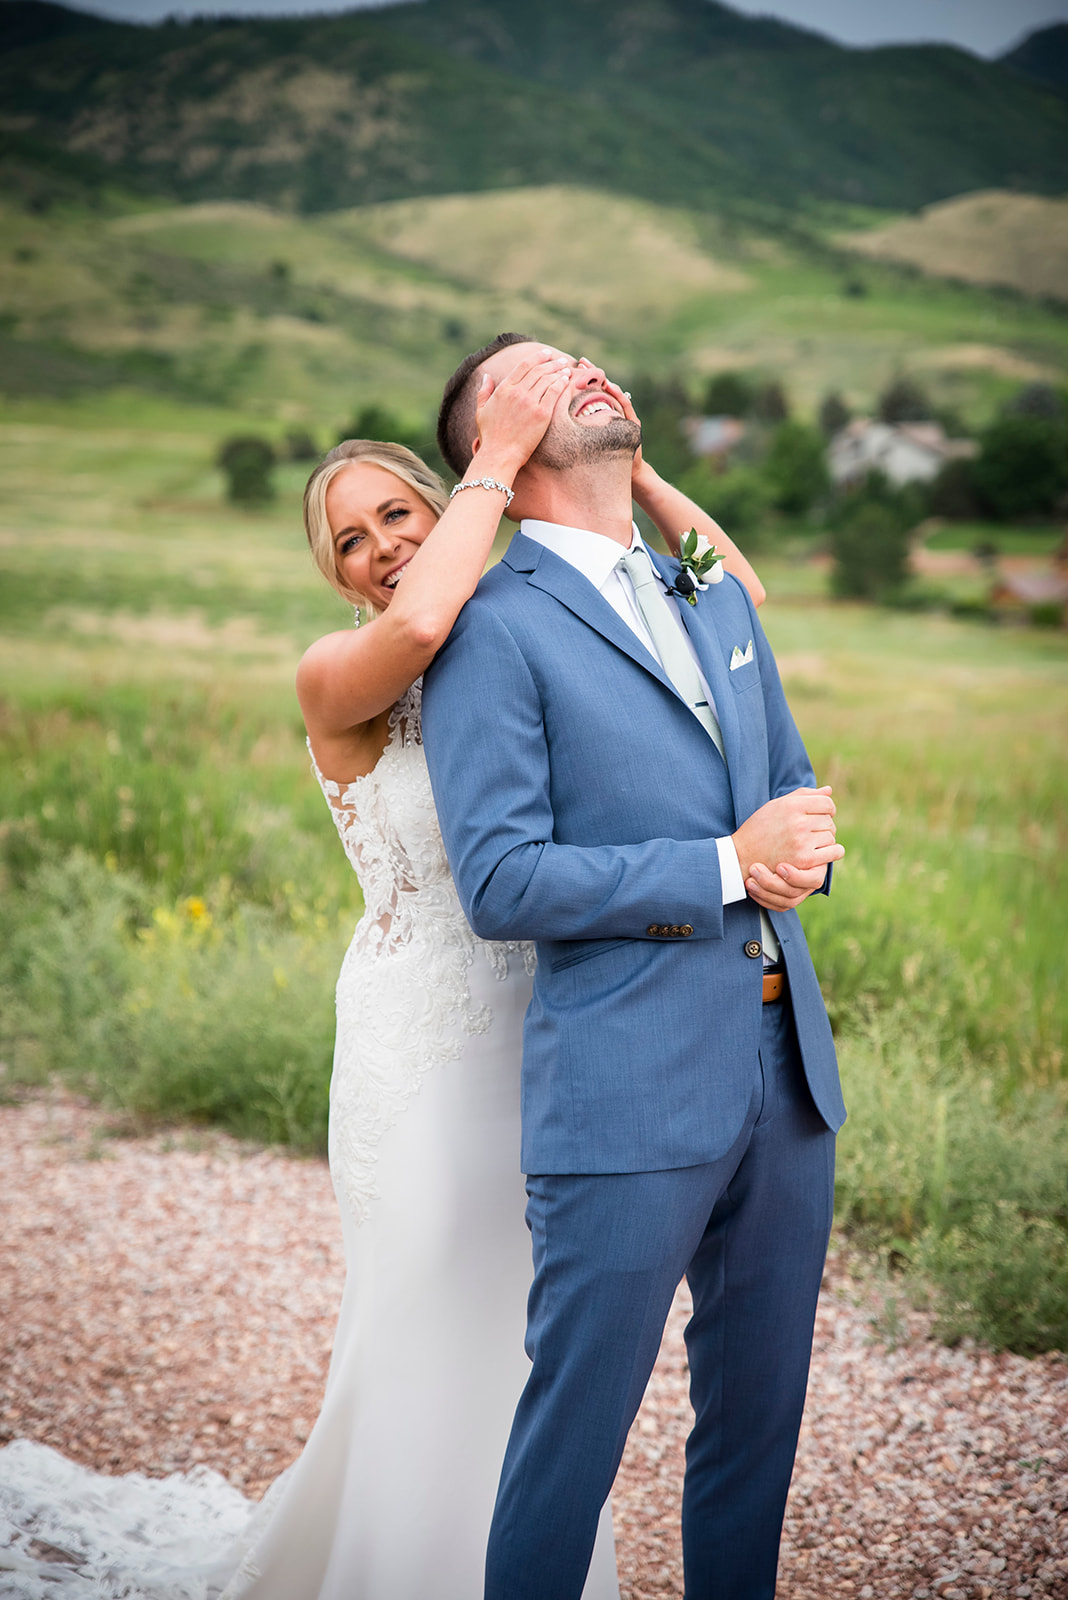 Bride comes up behind groom and puts her hands over his eyes.